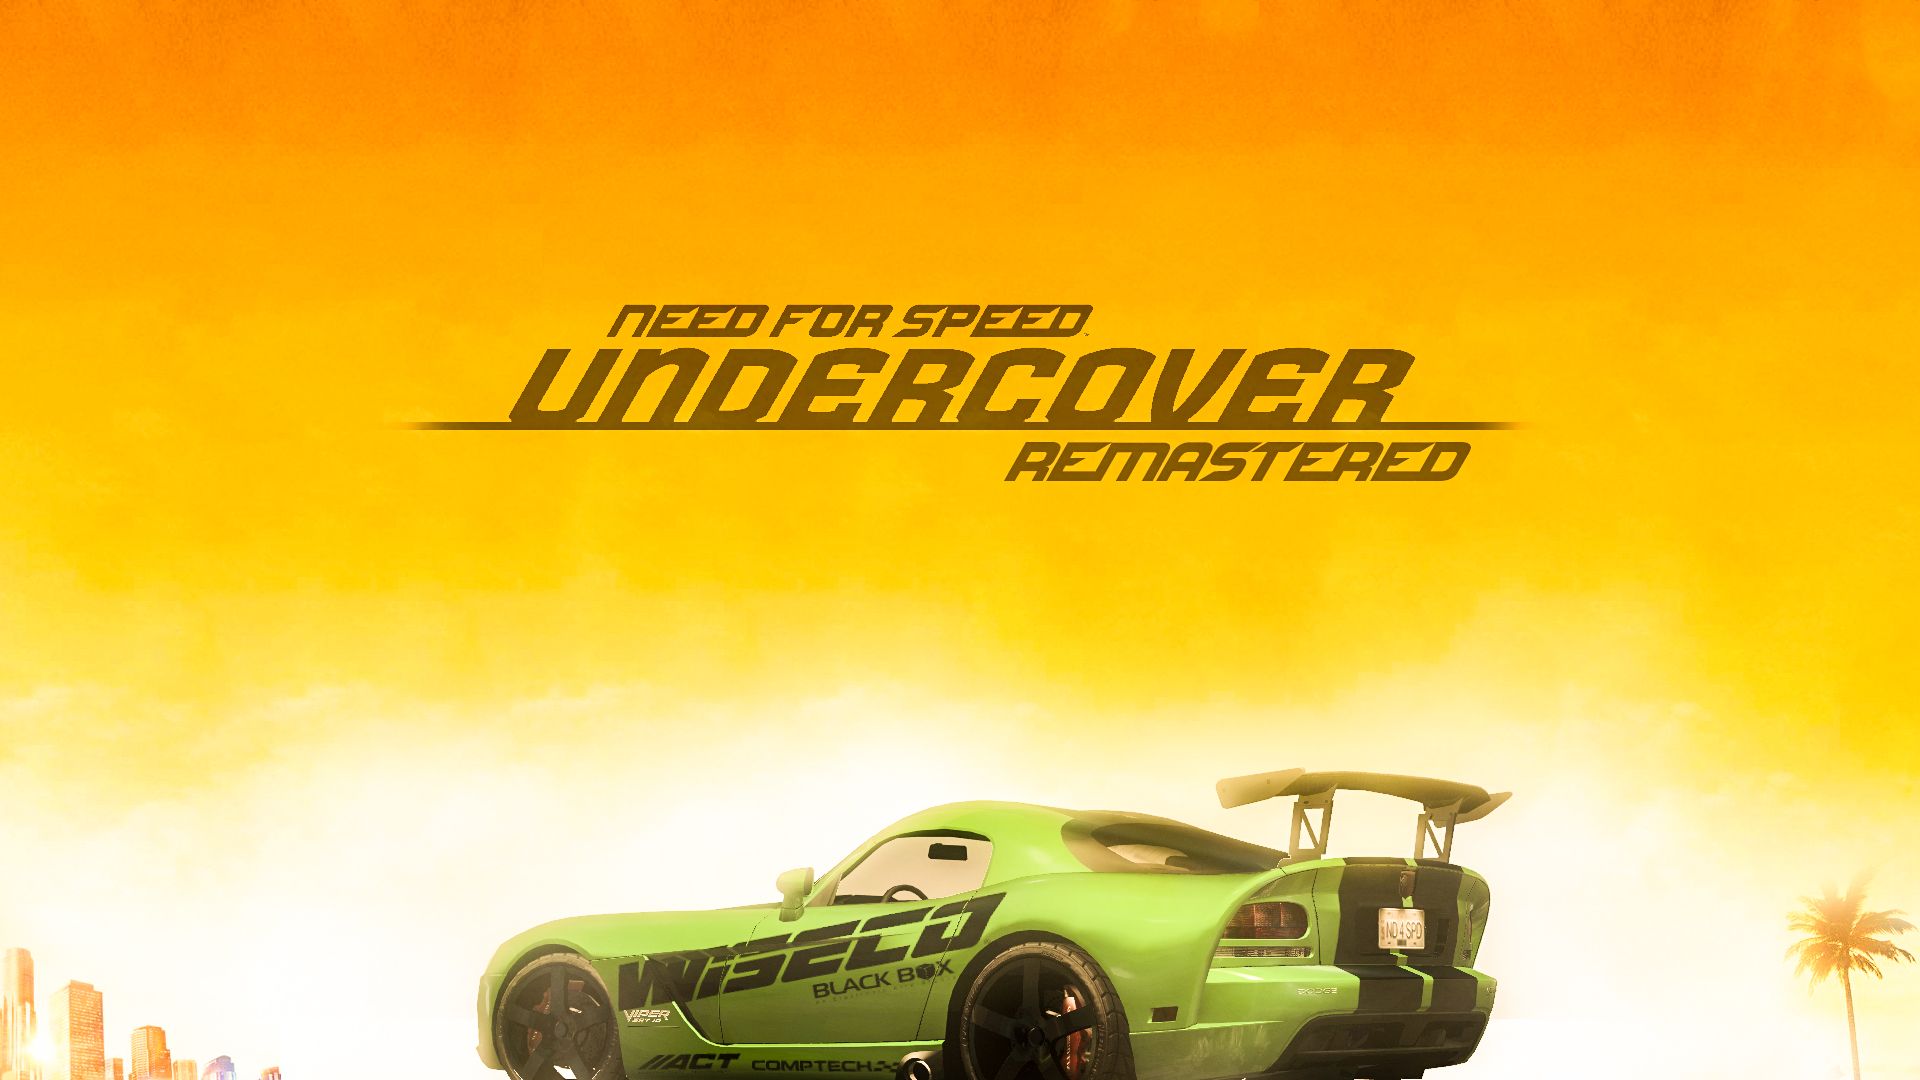 NFS Undercover. REMASTERED. DOUBLEPATCH.0 mod